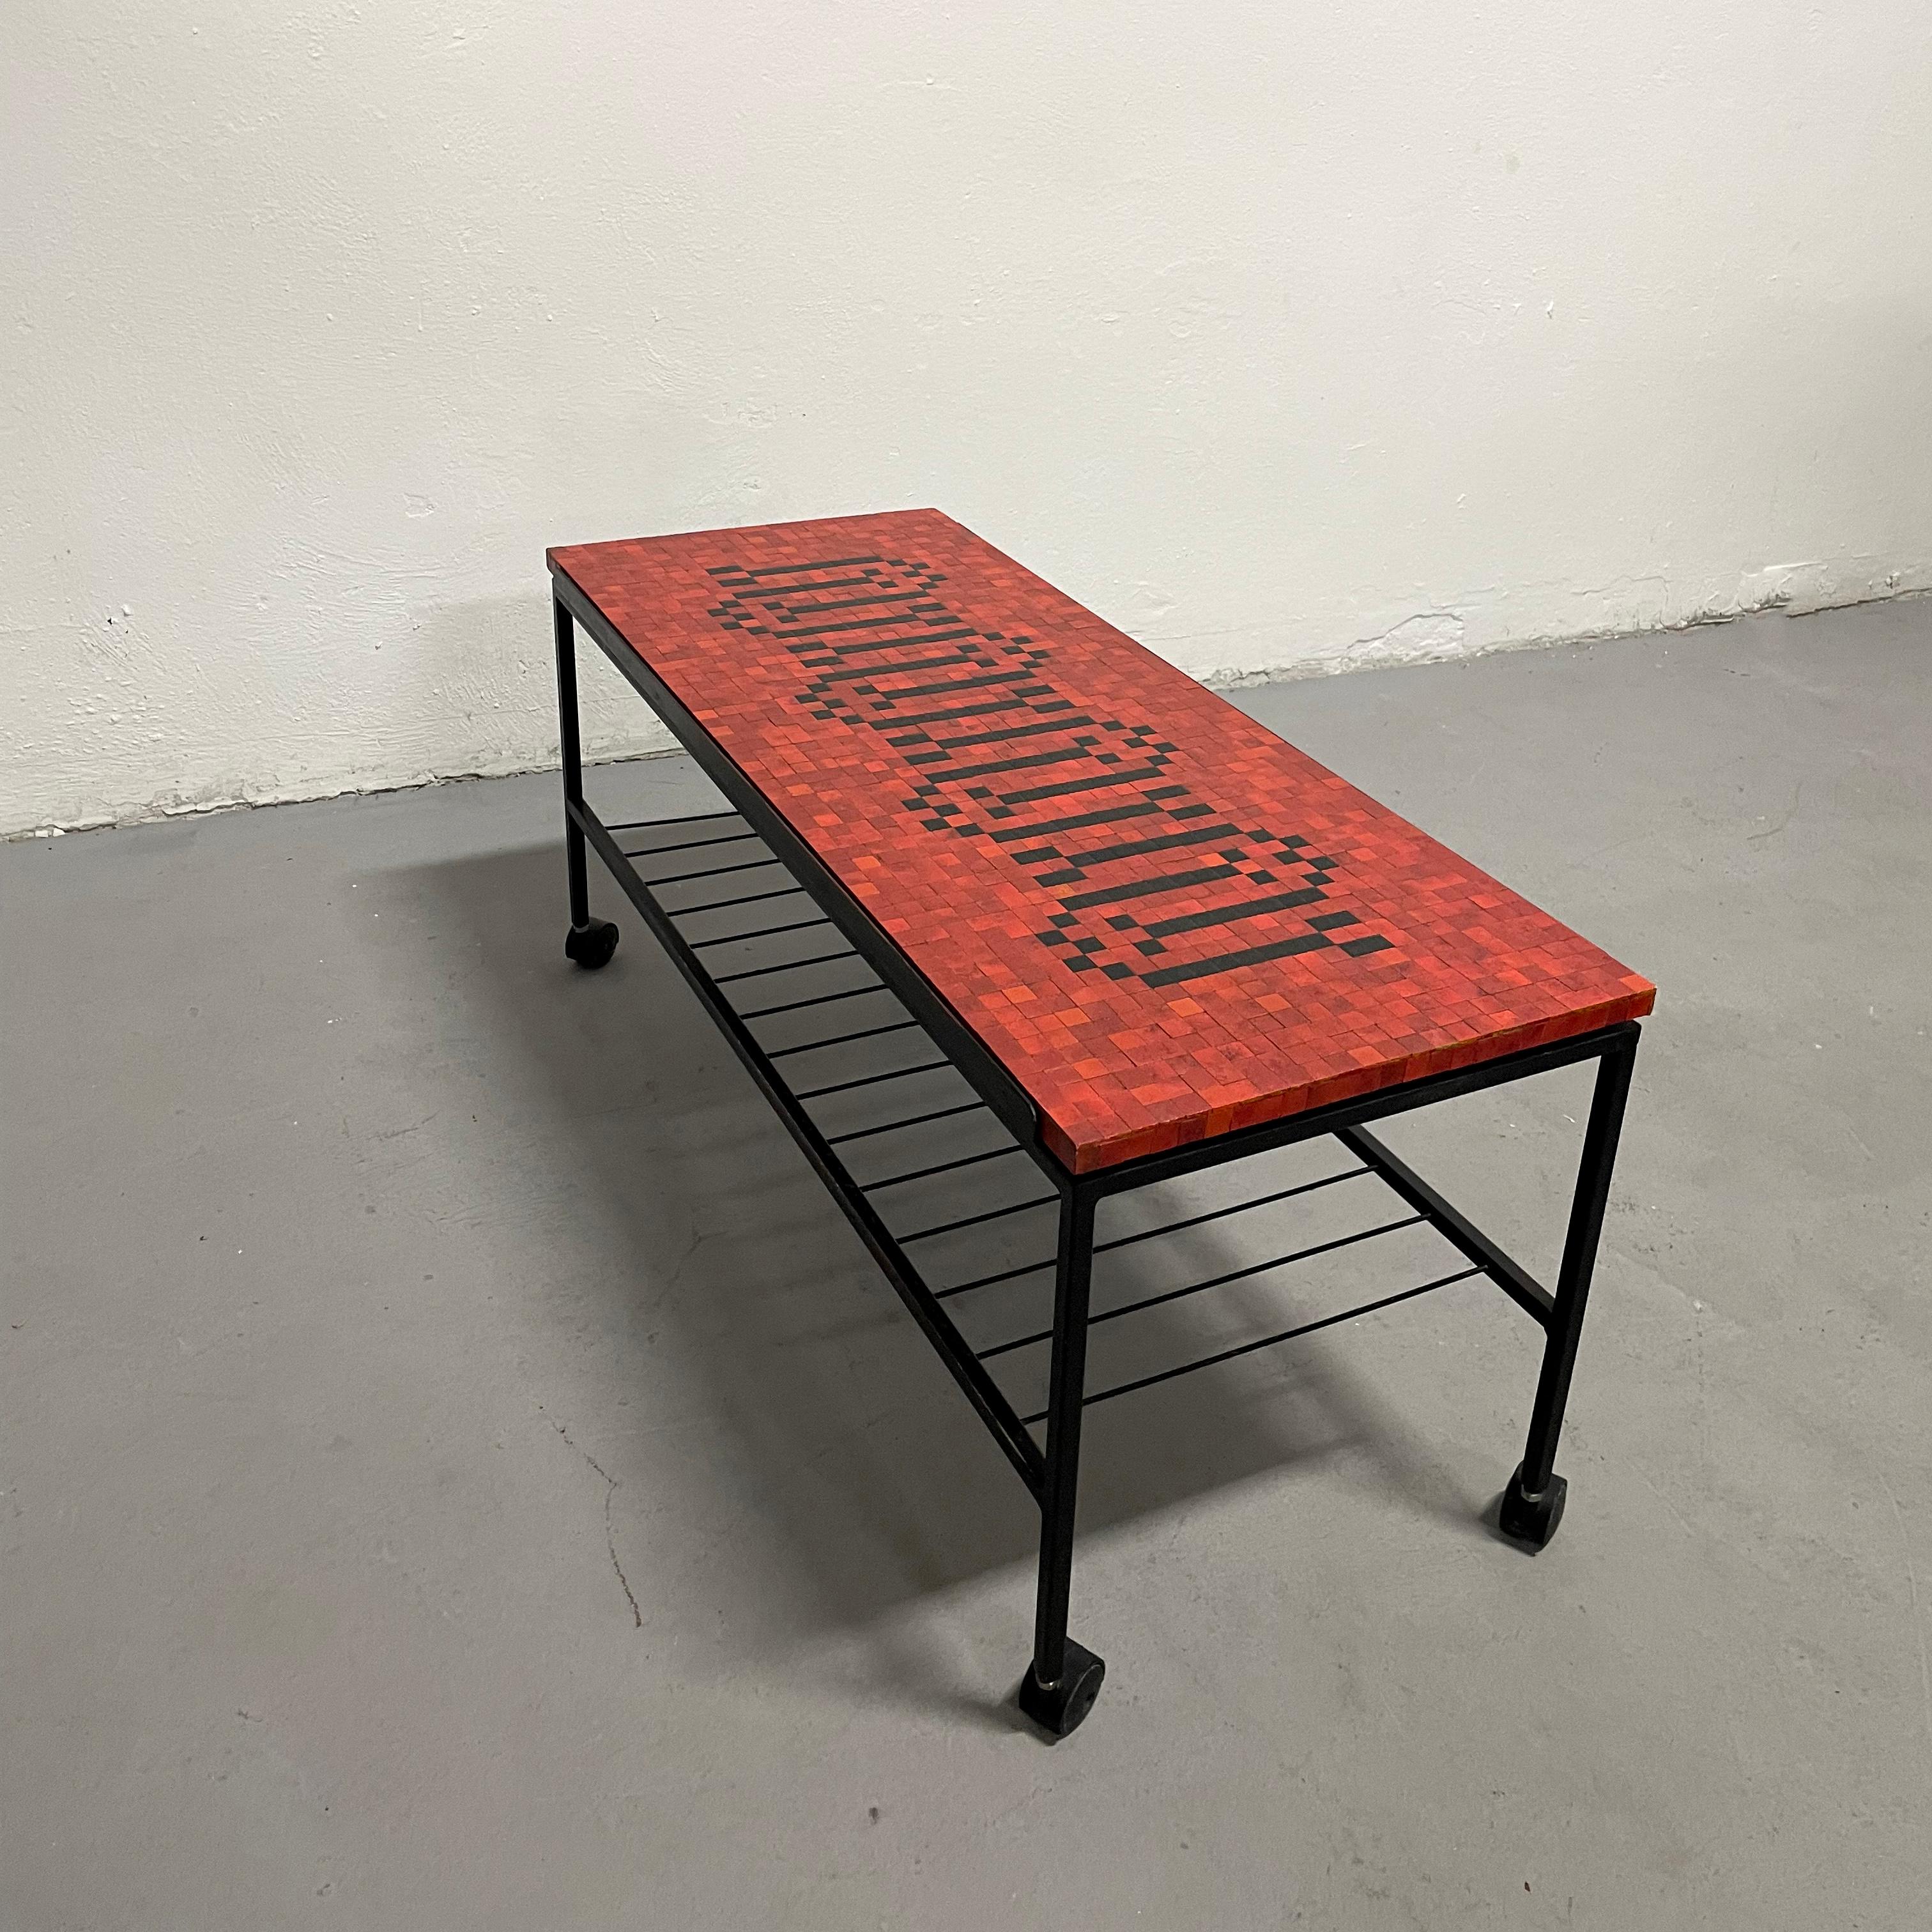 Mosaic Tile Coffee Table, Serving Bar Cart, Metal and Ceramic, 1950s For Sale 2